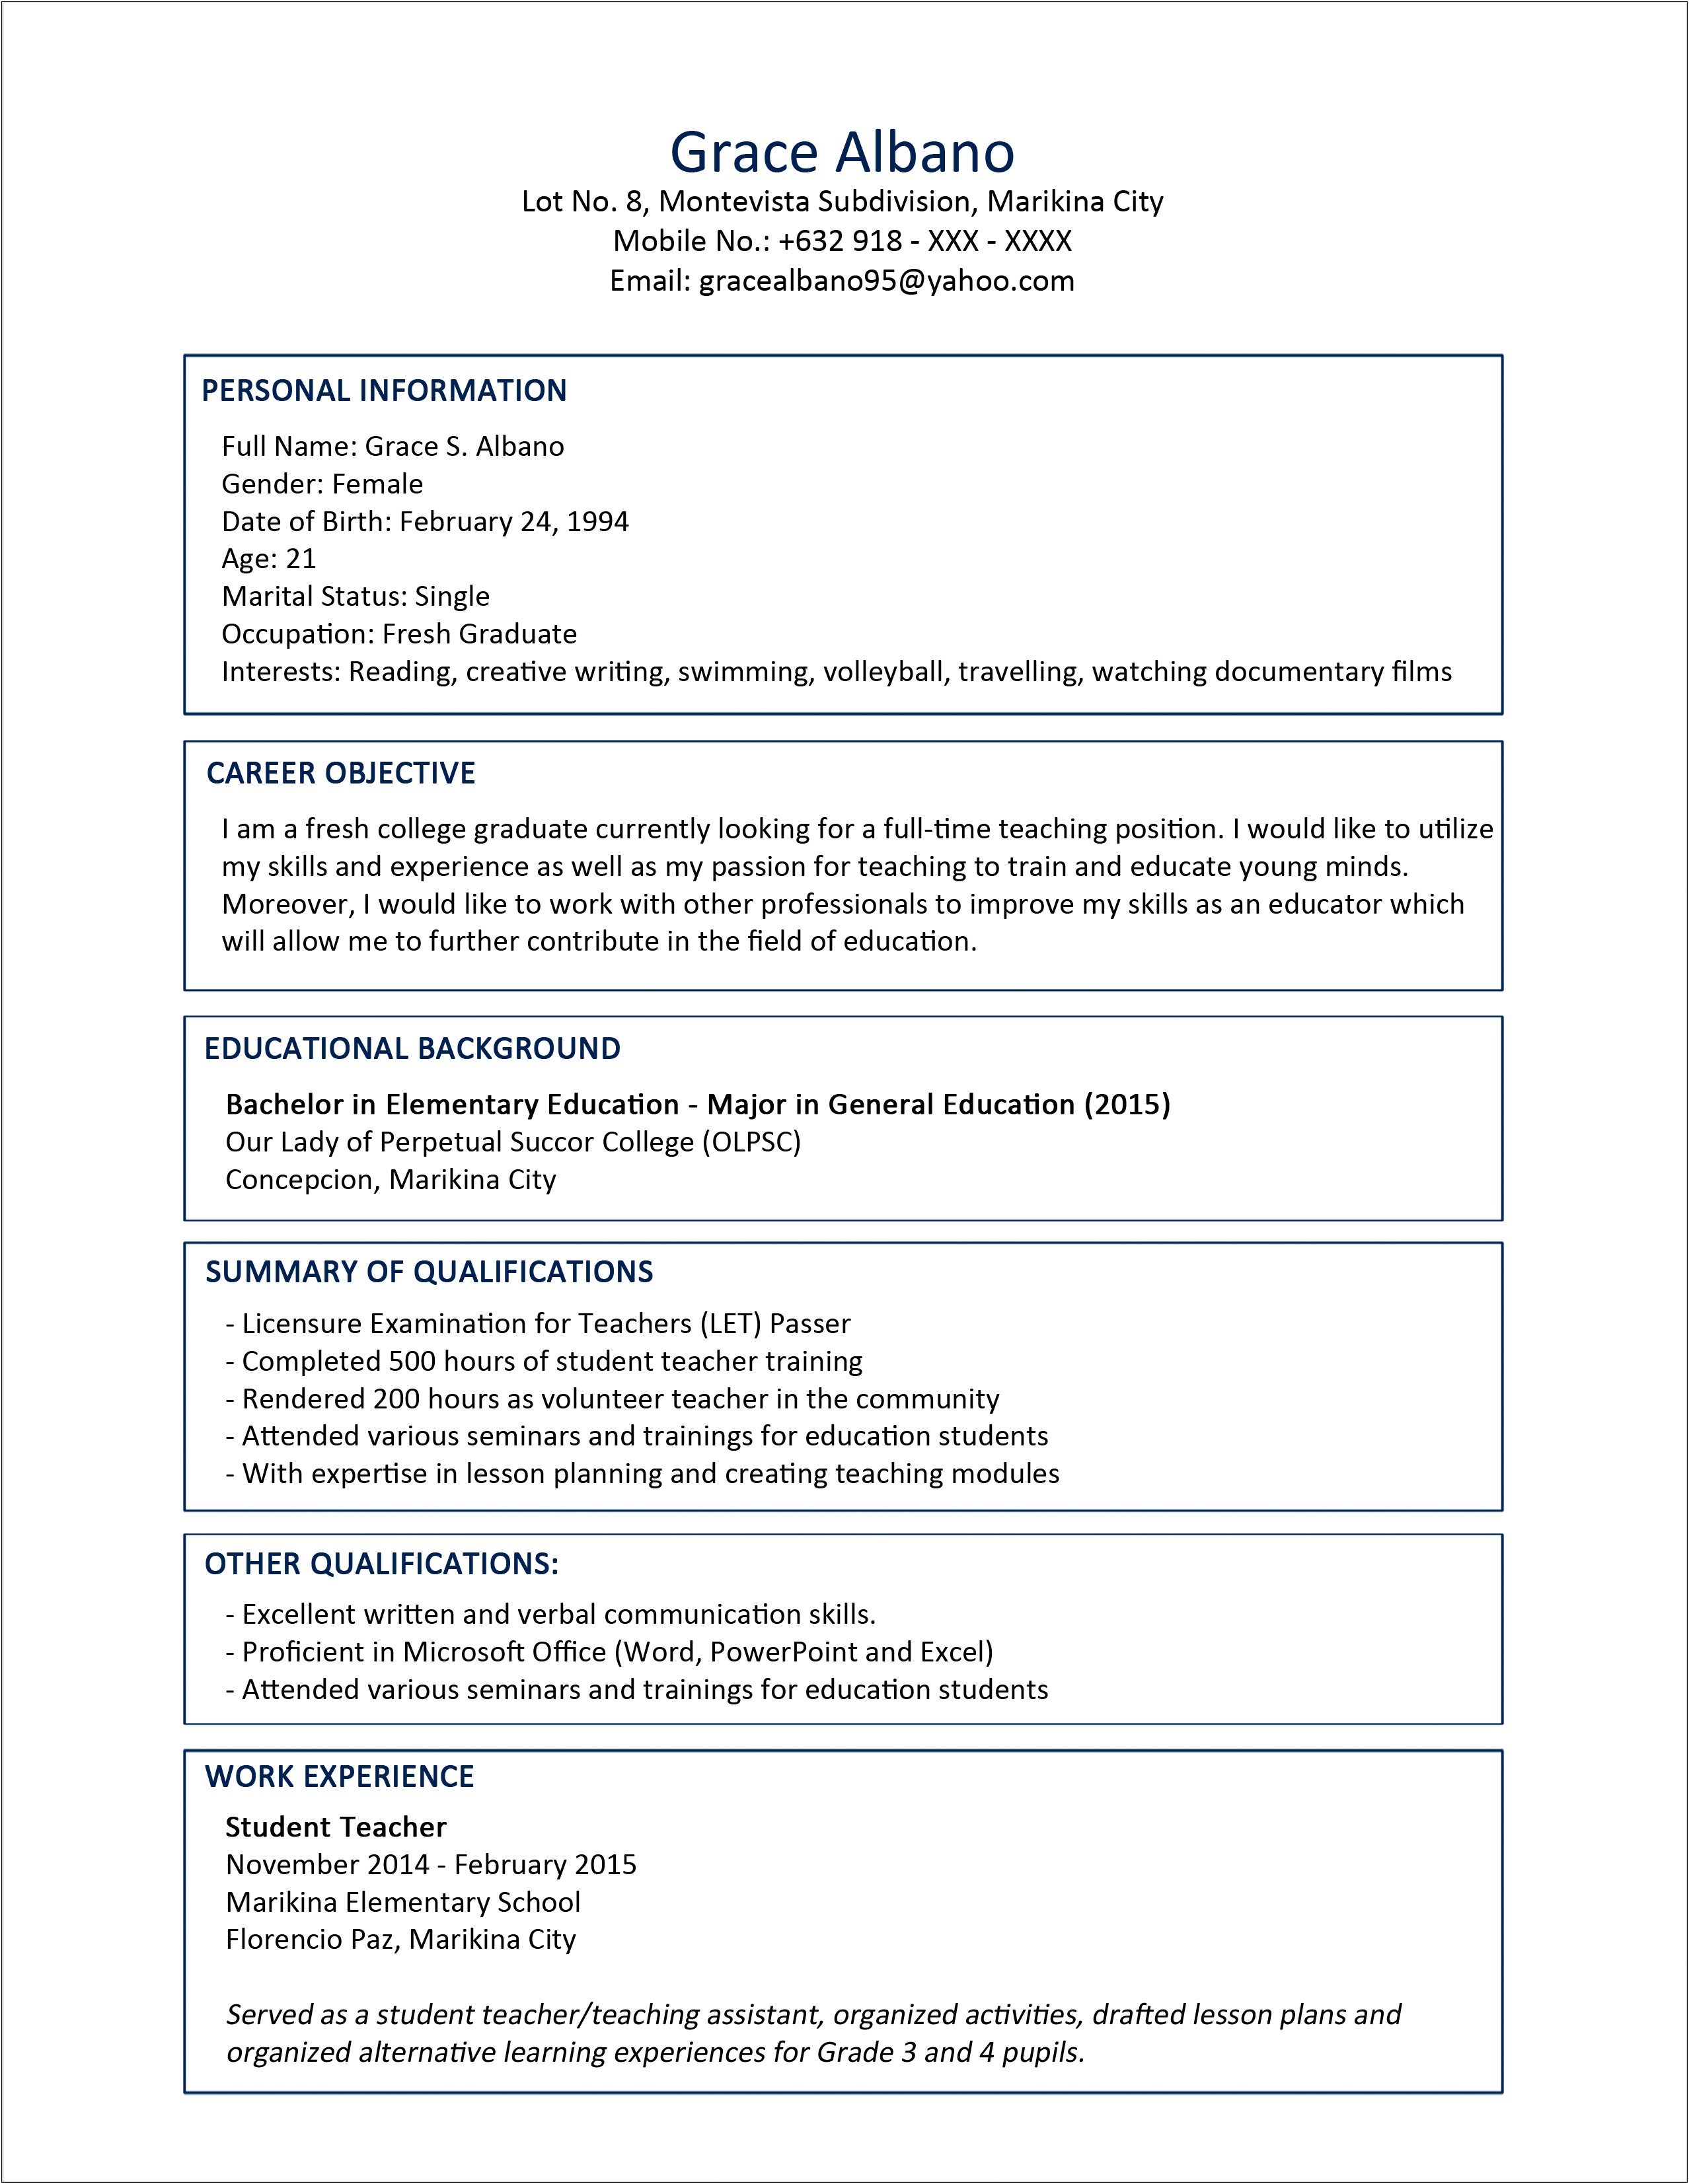 Samples Of Resume Background Education